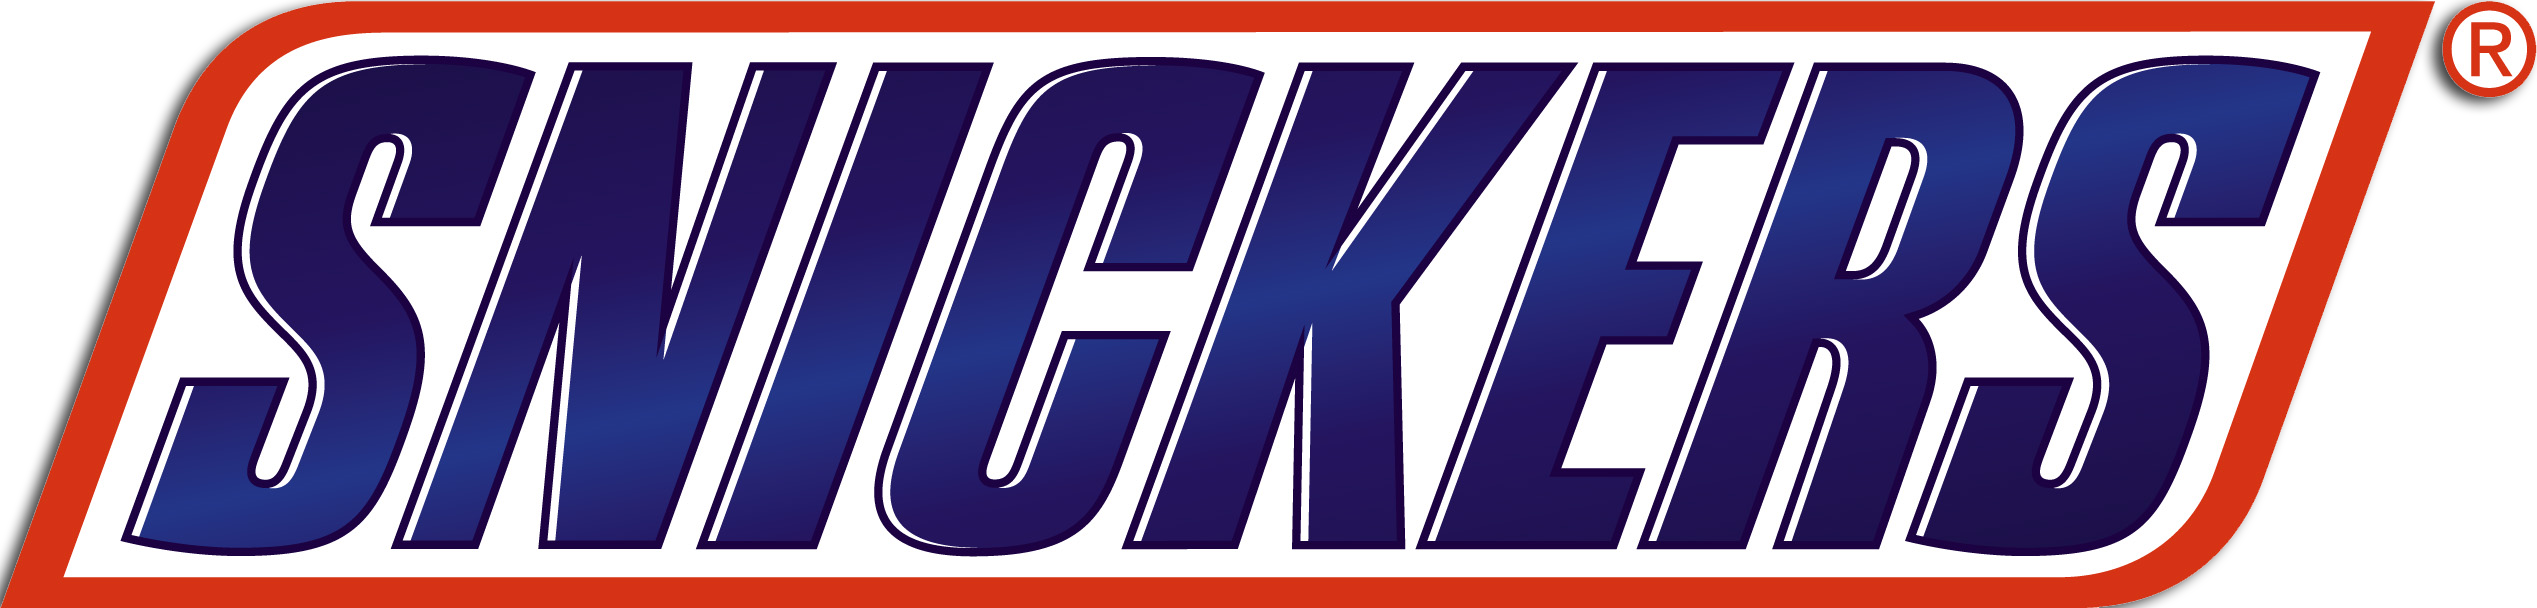 Snickers { PNG FILE } by Gala